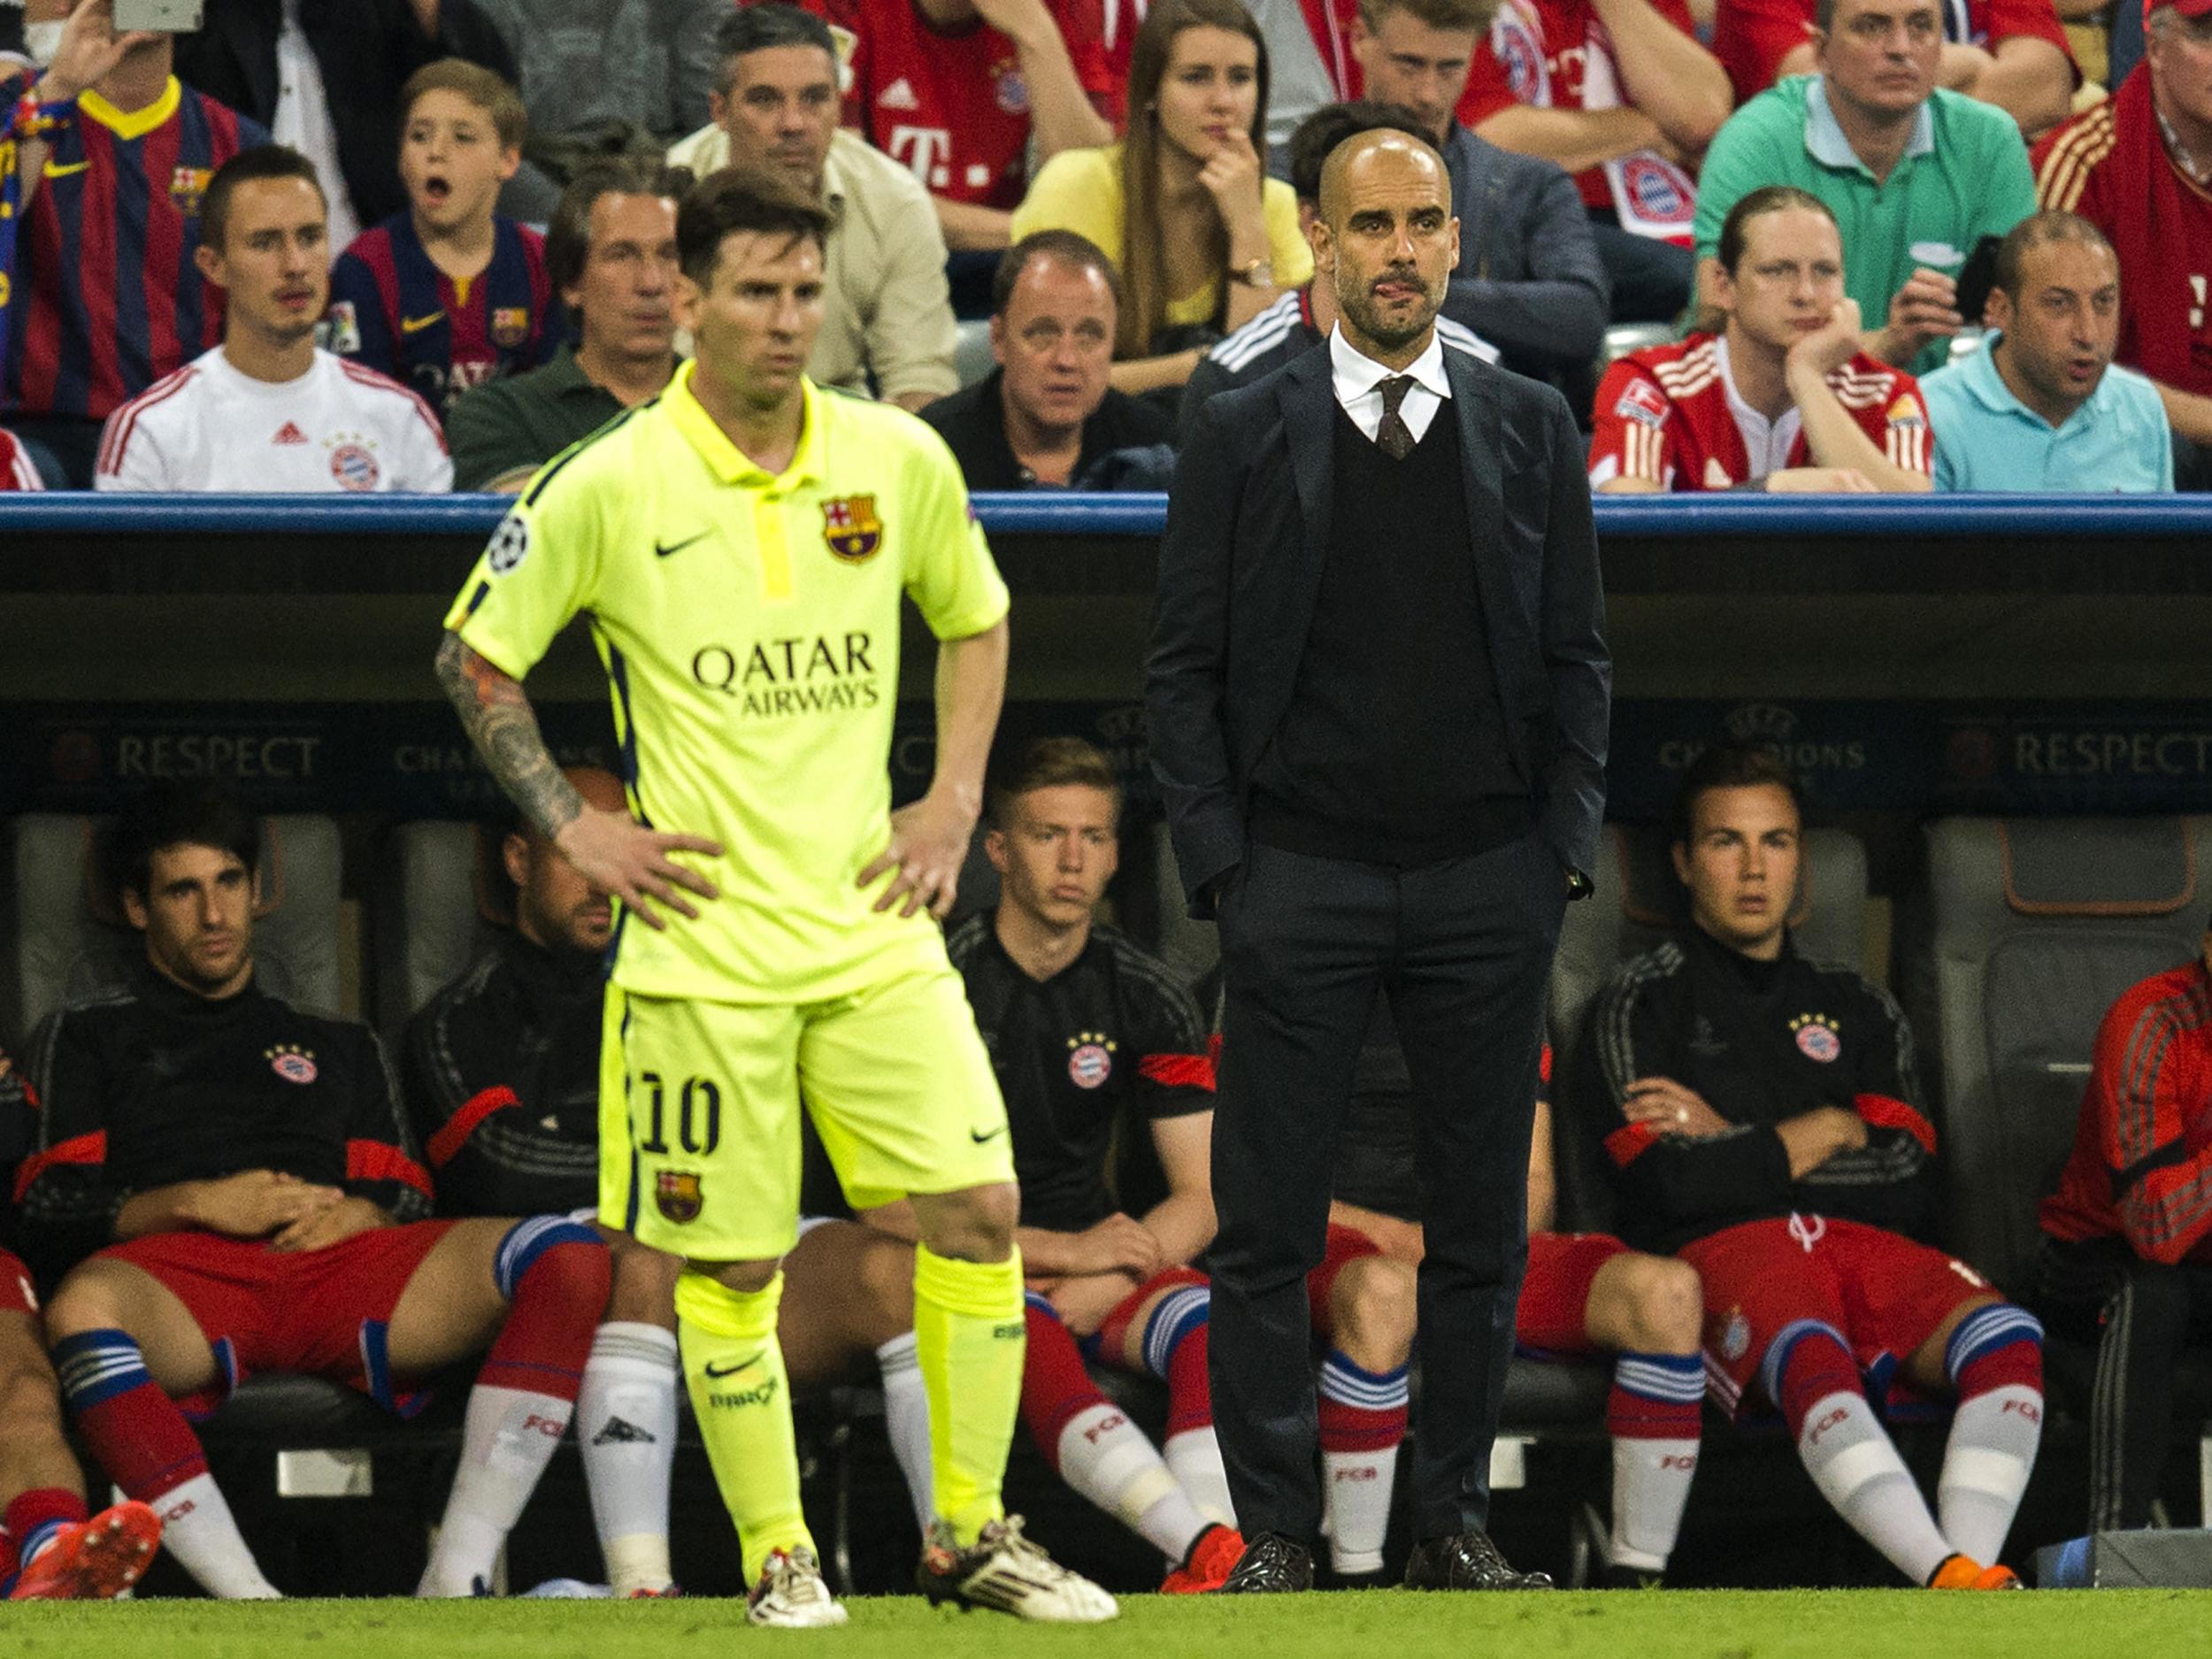 Messi called Guardiola to meet him four days after becoming City boss